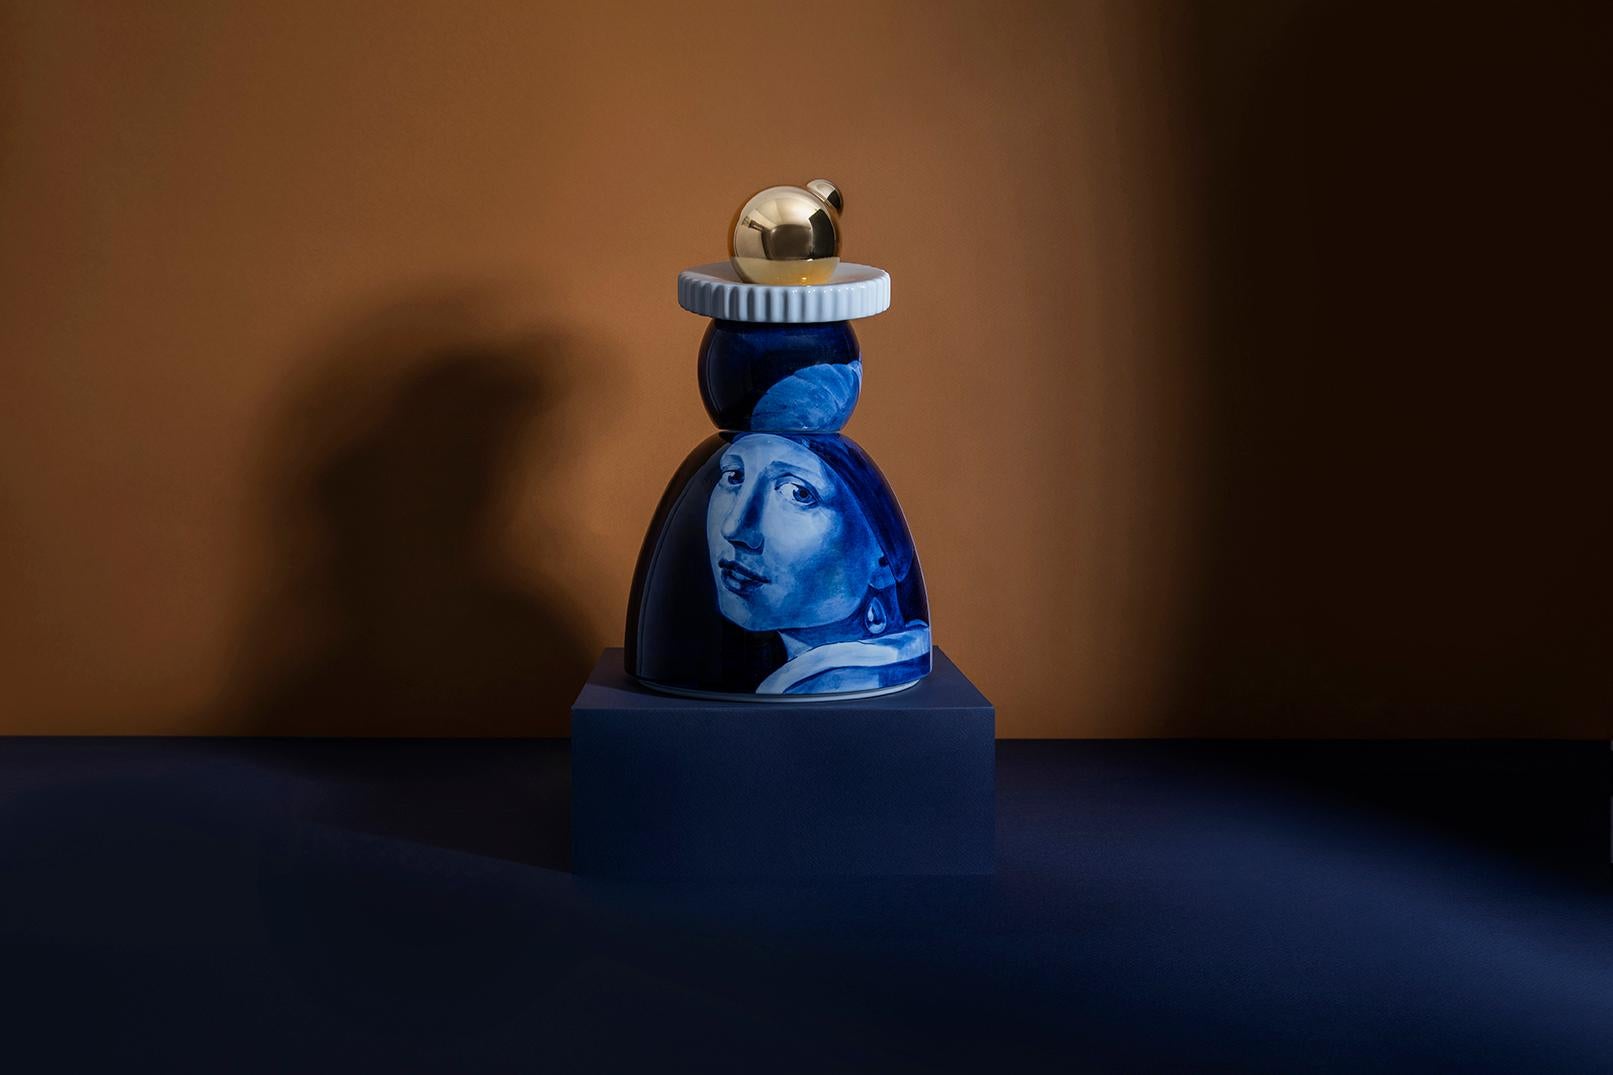 Handmade large figurine with Delft Blue handpainted painting of Vermeer Girl with the Pearl Earring. 
 
This year, Royal Delft is introducing the Vermeer collectibles by Royal Delft, putting the 17th-century master Johannes Vermeer in the spotlight.